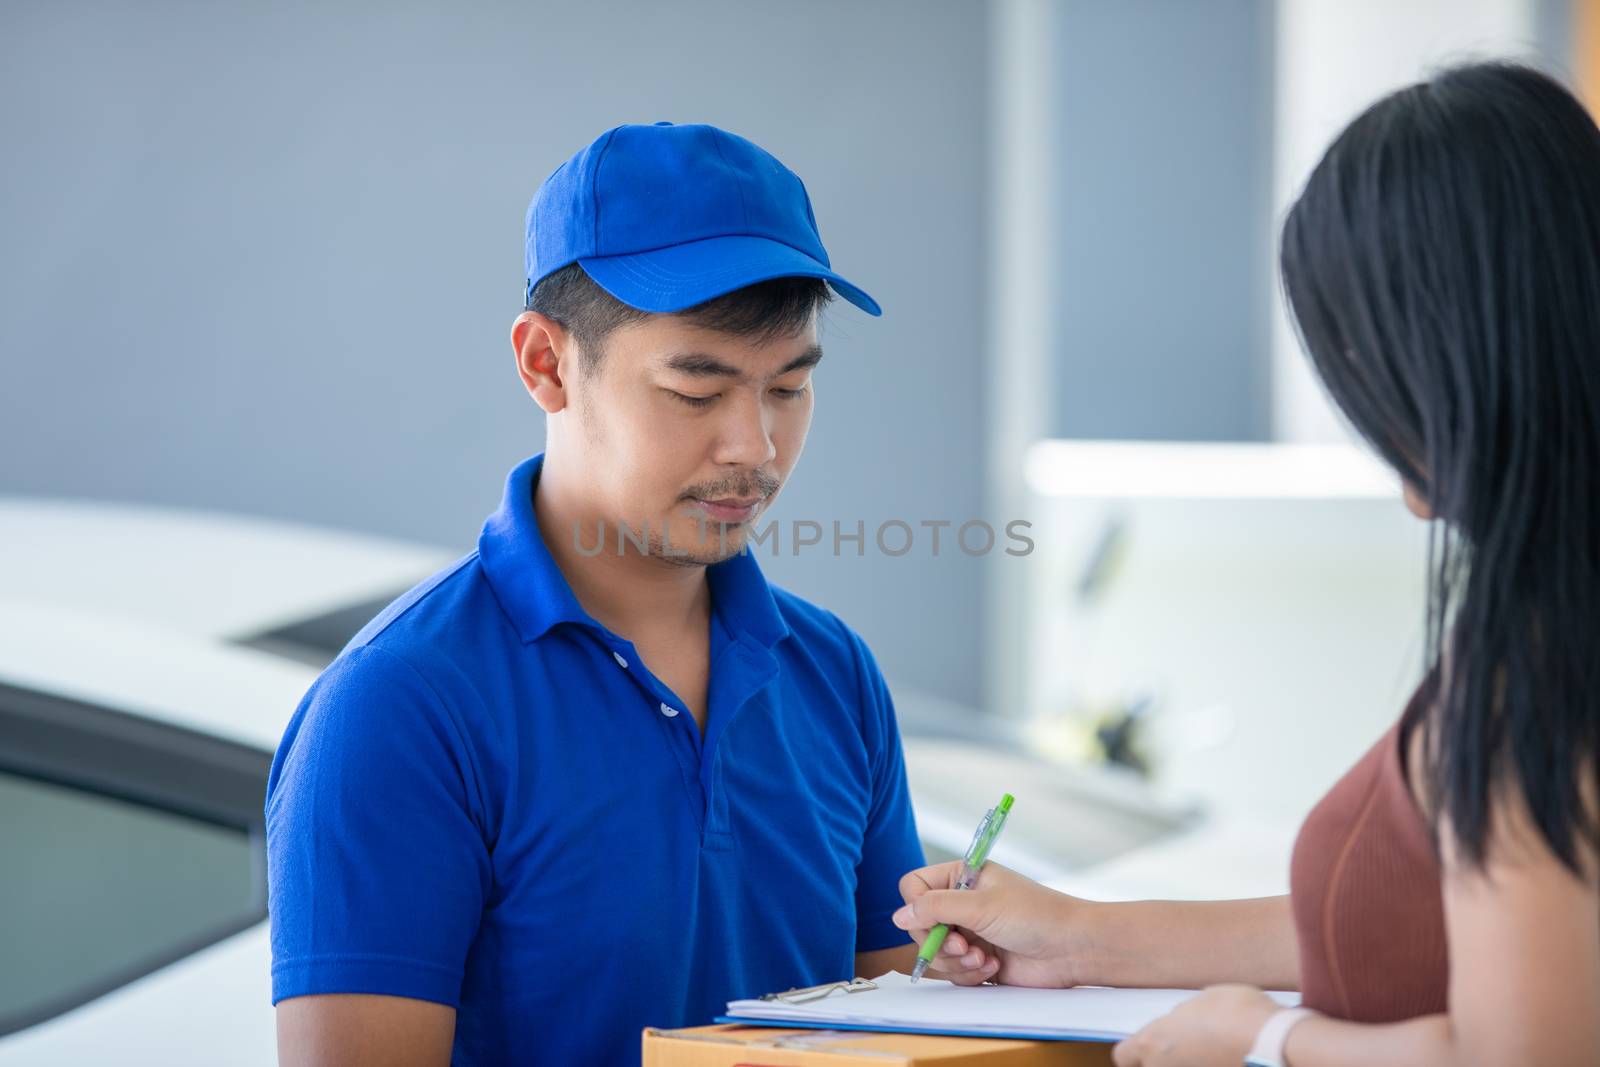 Asian delivery servicemen wearing a blue uniform with a bluecap and  handling cardboard boxes to give to the female customer in front of the house. Online shopping and Express delivery by Tuiphotoengineer